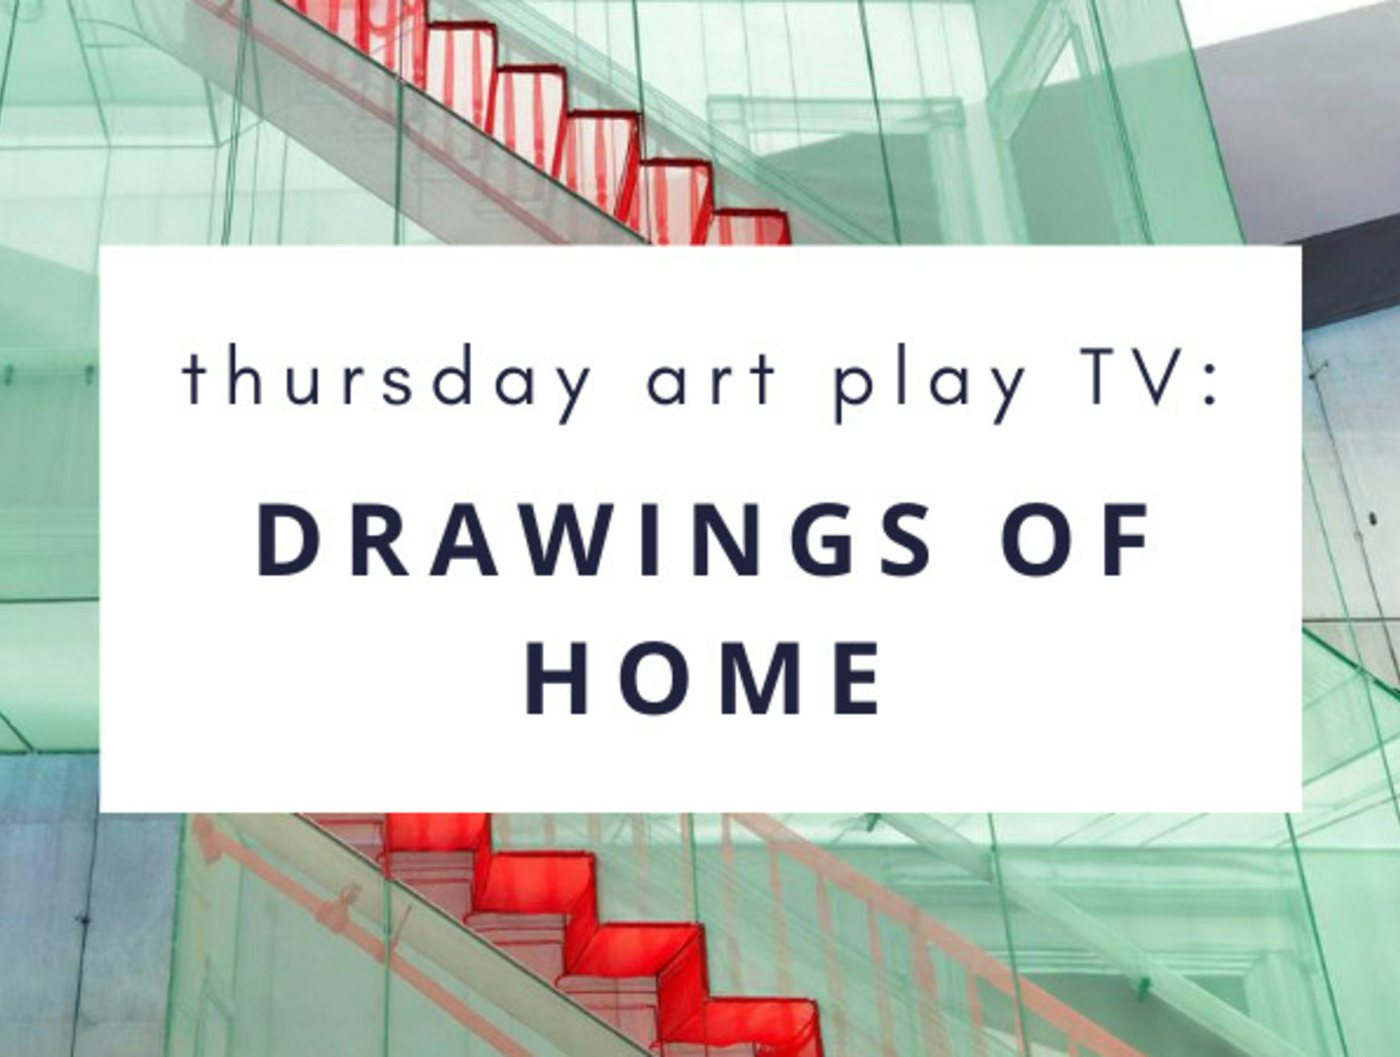 Thursday Art Play TV: Drawings of Home